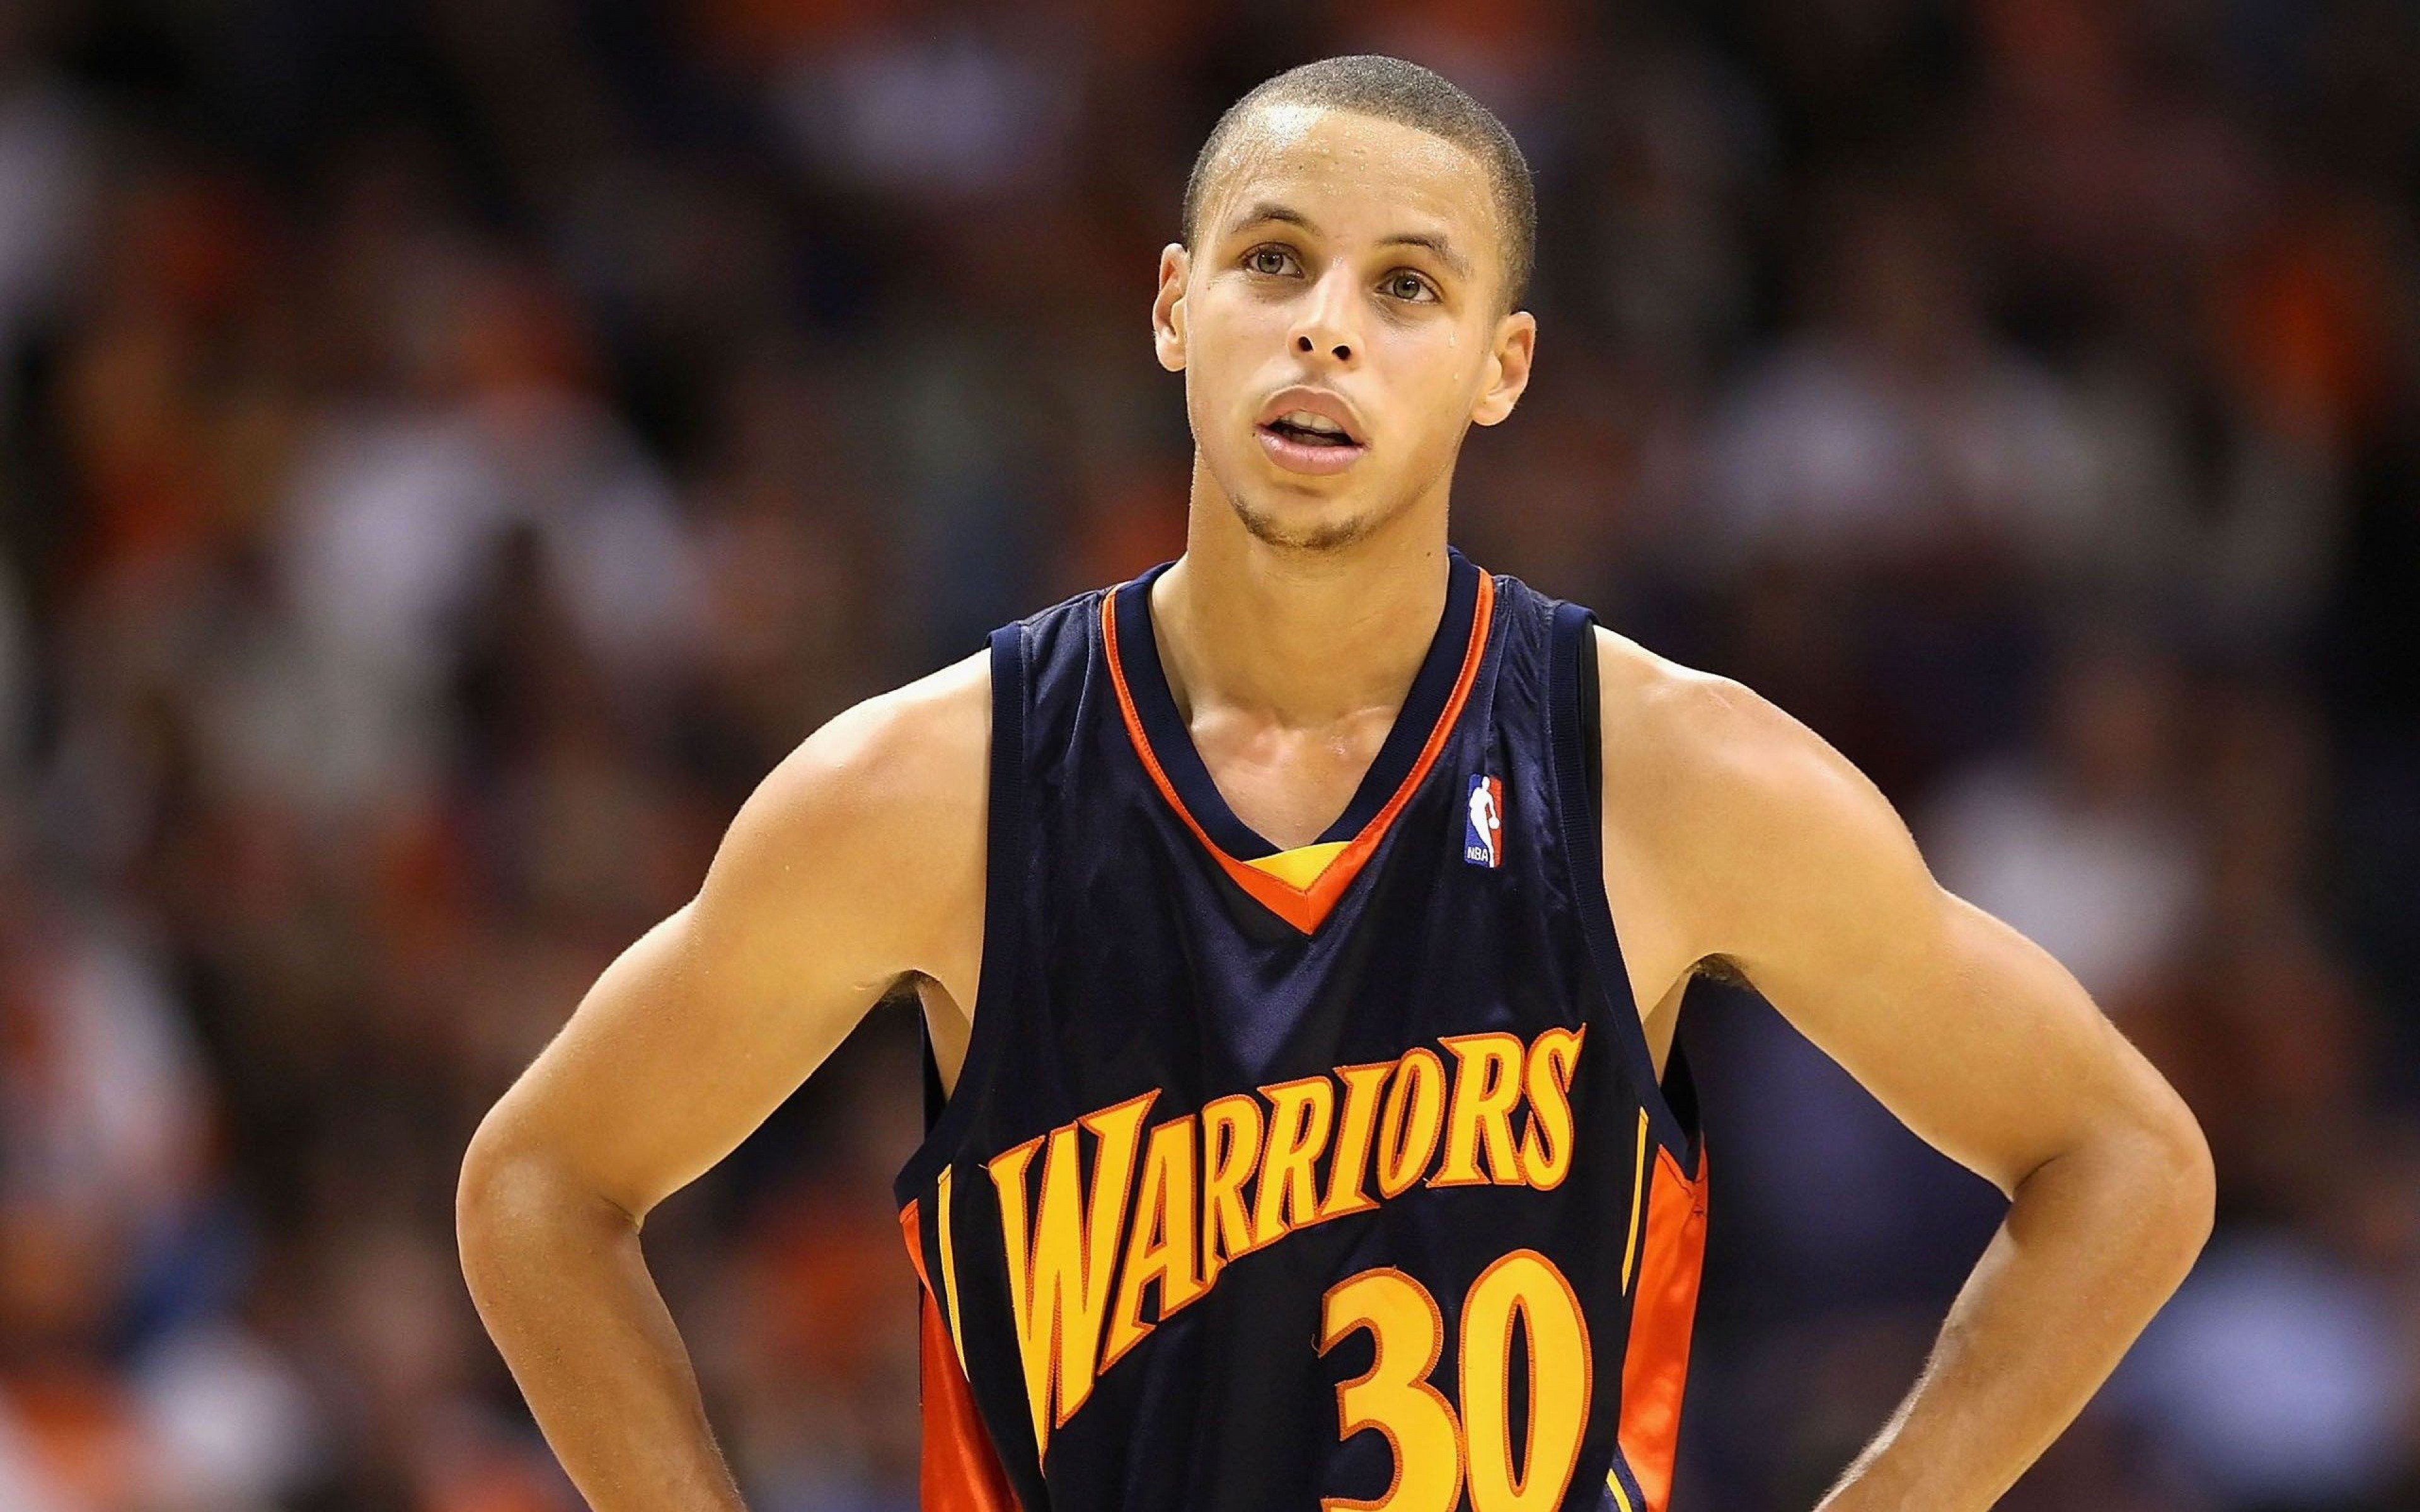 Stephen Curry Basketball Player Wallpaper New HD Wallpapers